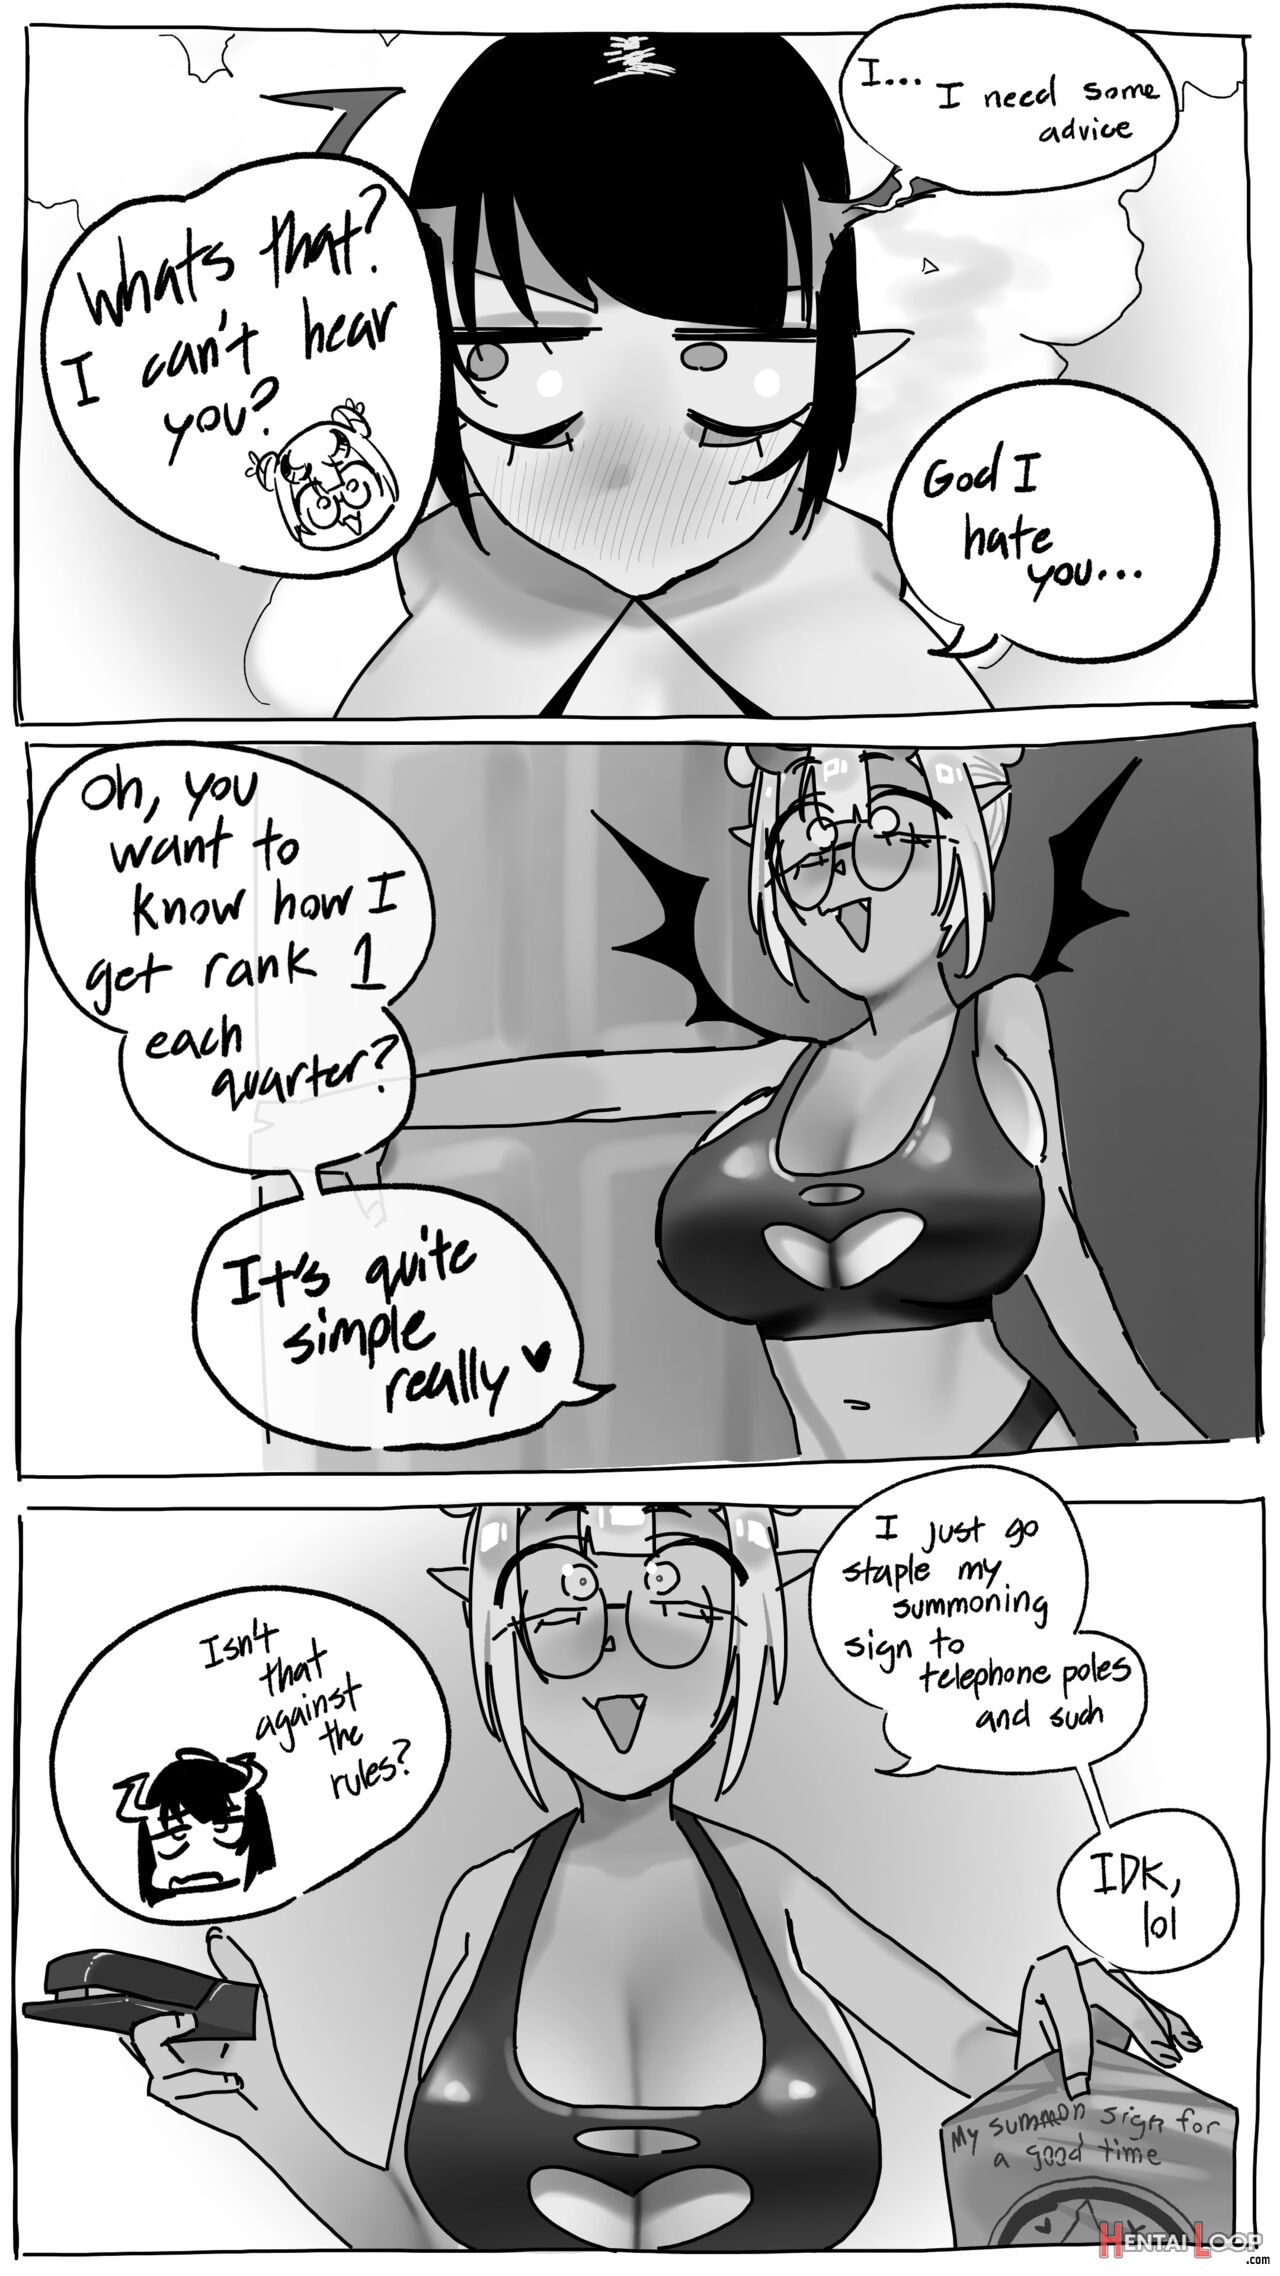 Succubus Story - Decensored page 6